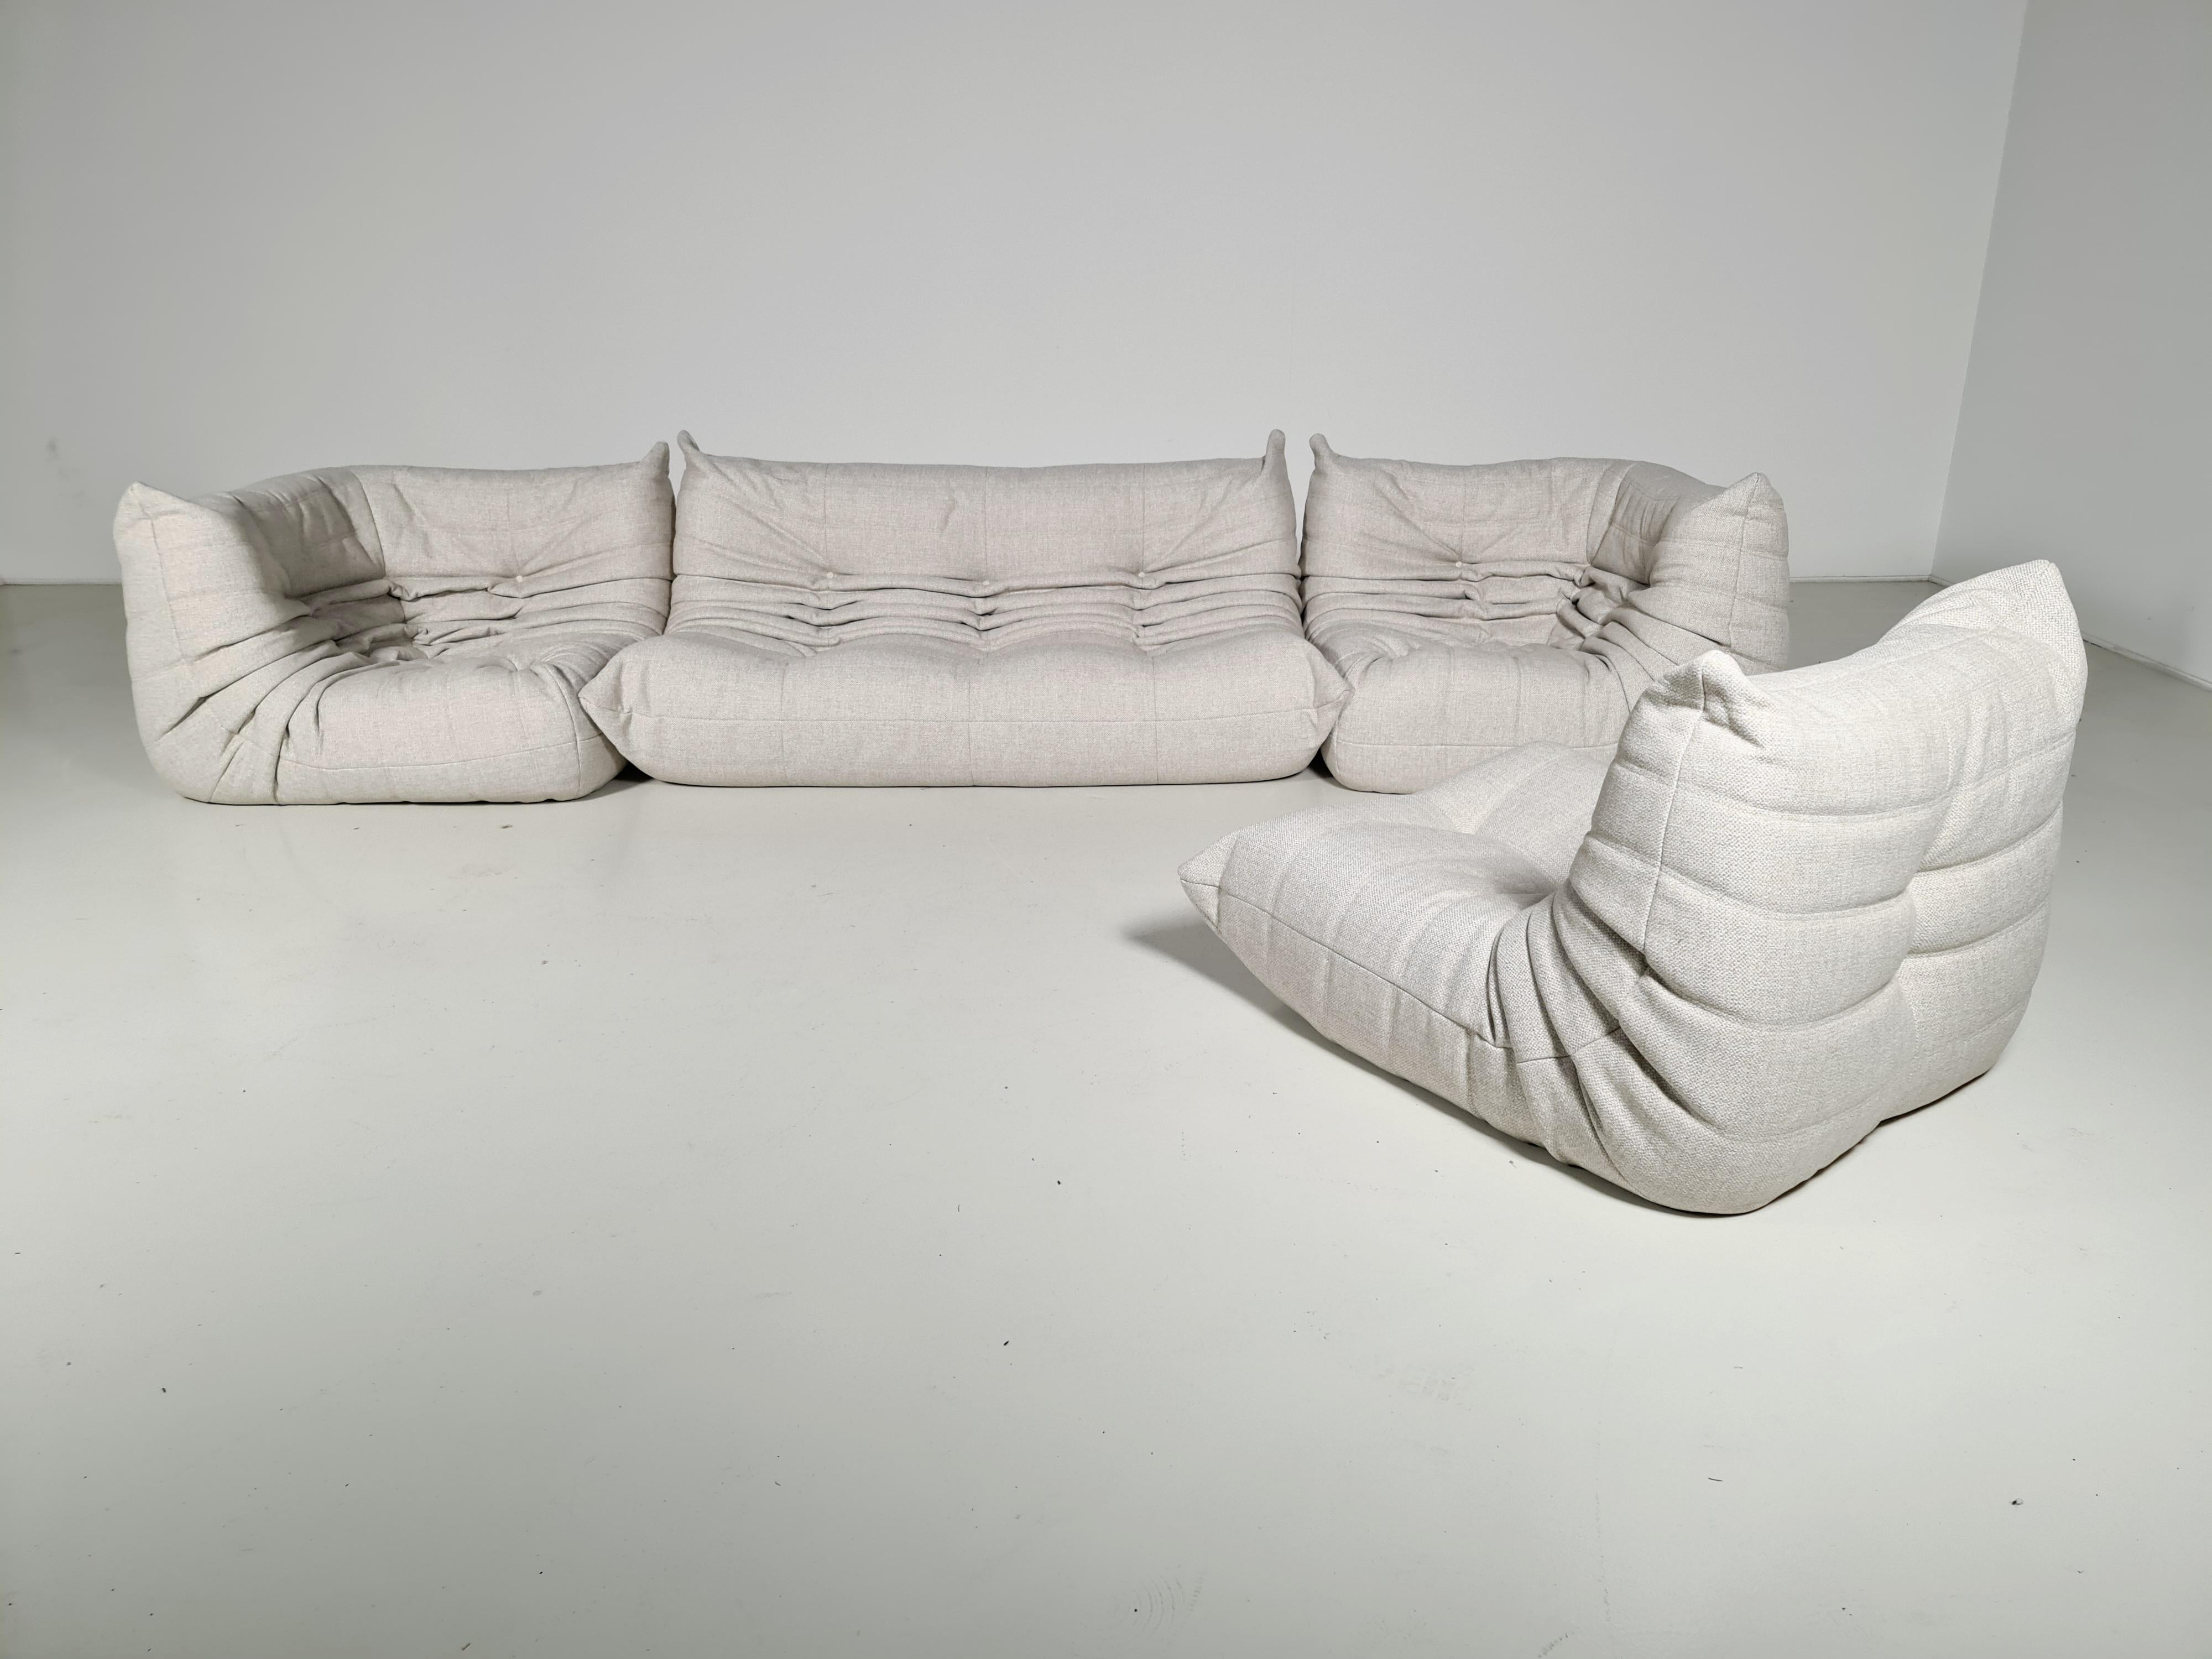 Original Togo vintage sofa designed by Michel Ducaroy in the 1970s for Ligne Roset.
The sofa shows a nice natural color tone and its famous wrinkled cozy design.
Labeled at the back and lined underneath with original fabric. Only the 3-seater has